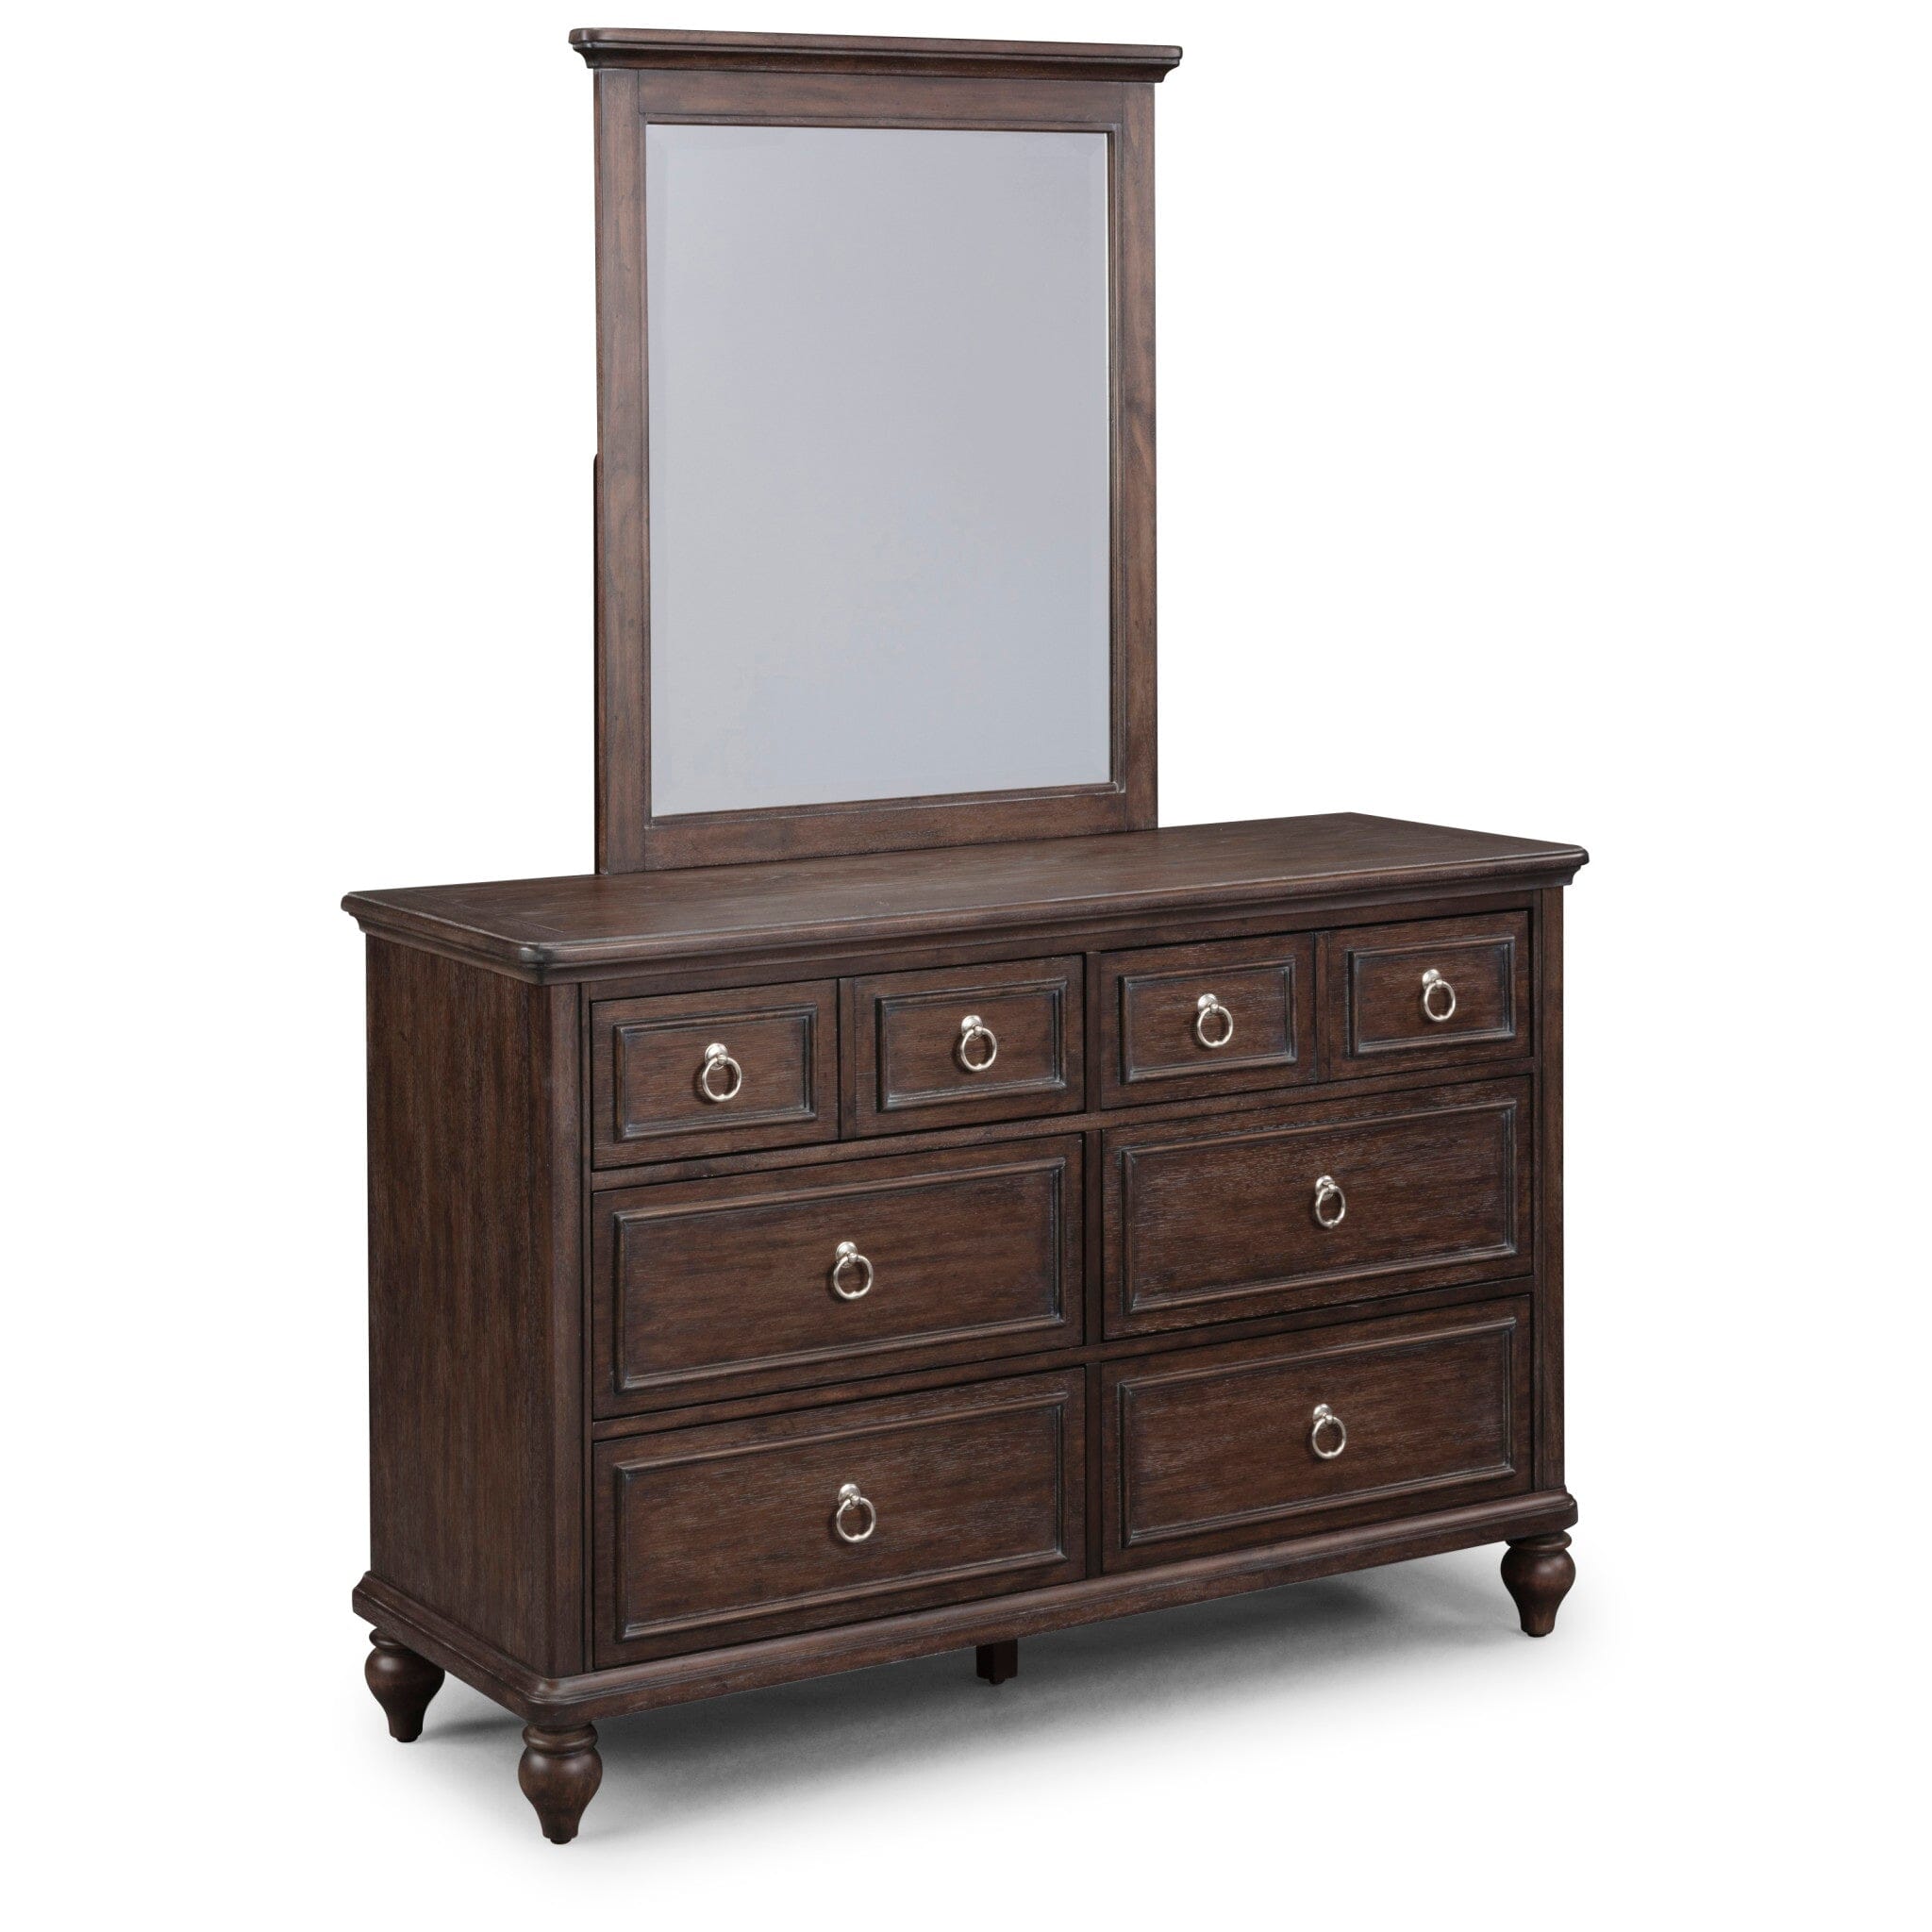 Coastal Dresser with Mirror By Southport Dresser Southport